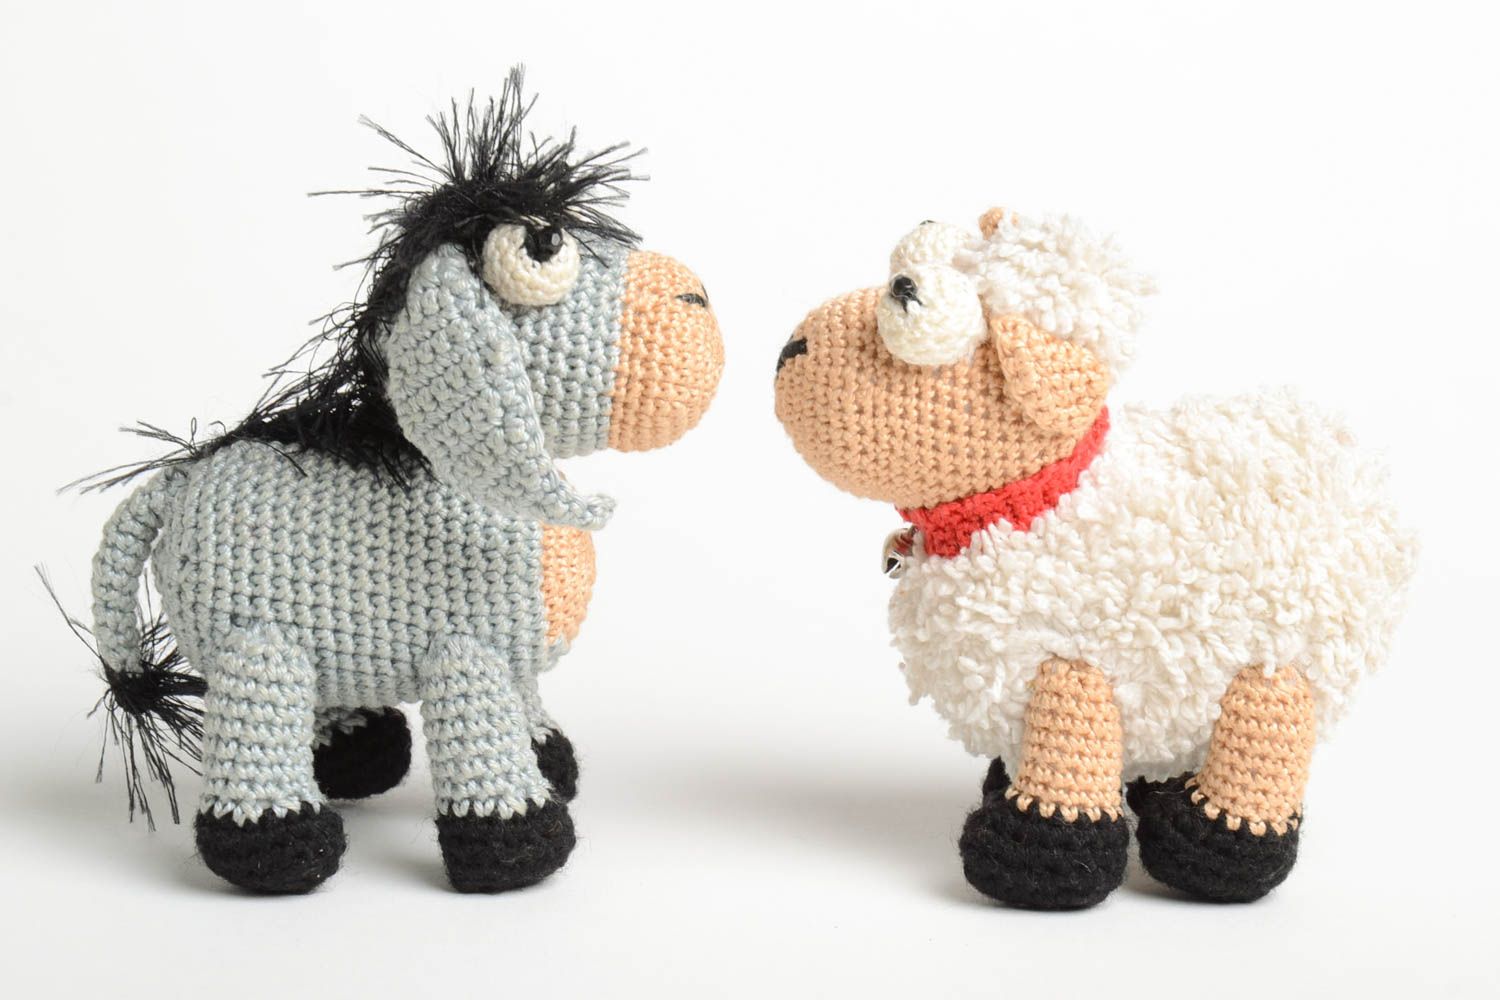 Handmade toy set of 2 items decor ideas gift for baby crocheted toy animal toy photo 5